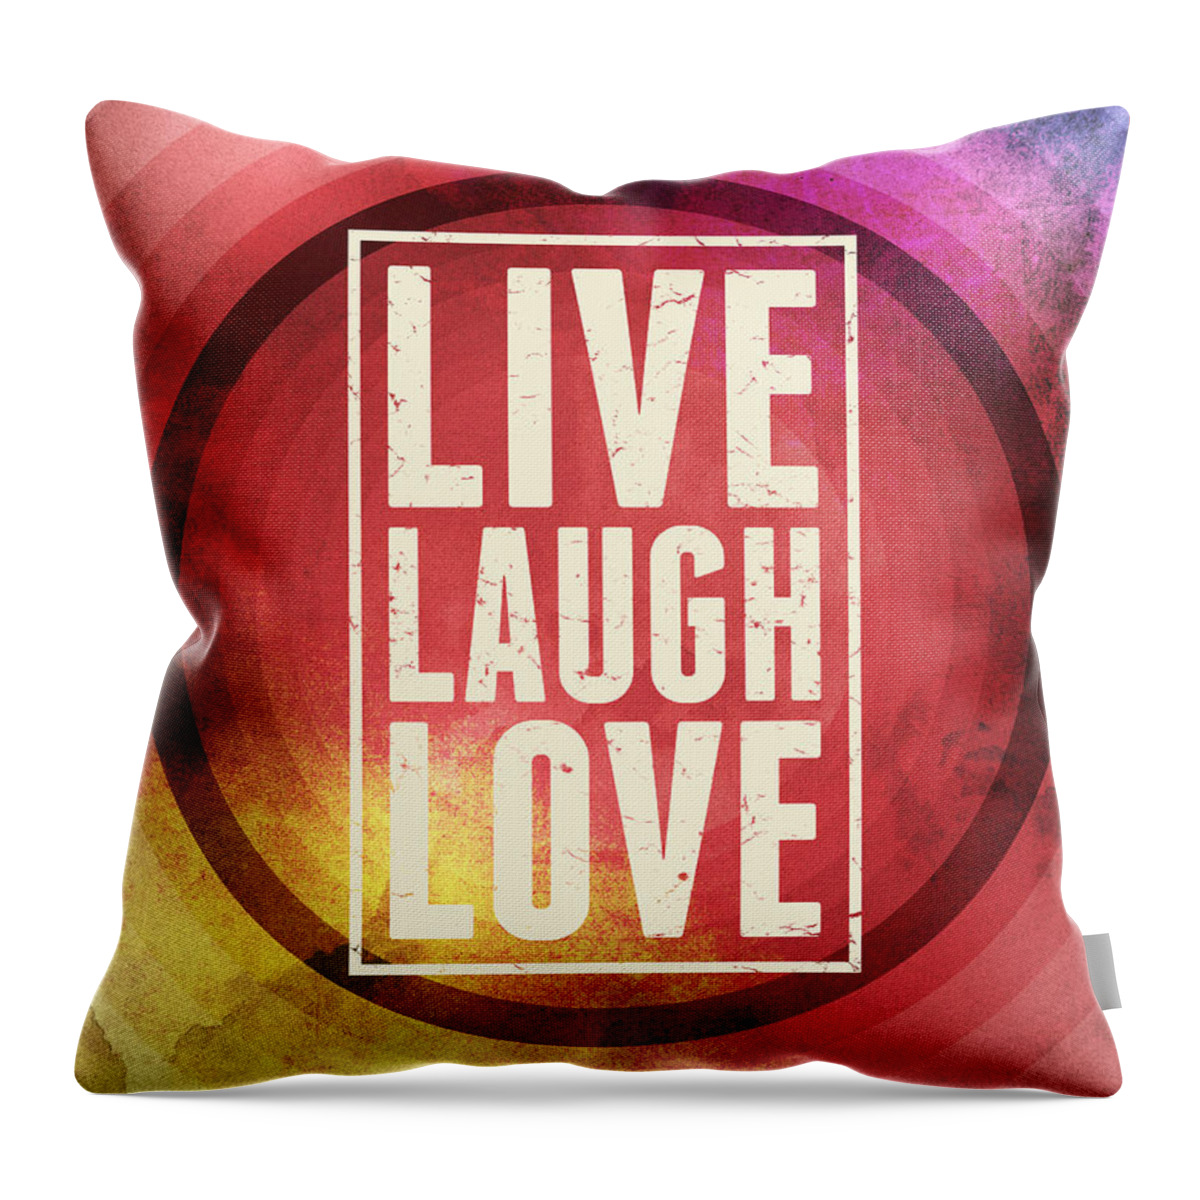 Live Laugh Love Throw Pillow featuring the digital art Live Laugh Love by Phil Perkins